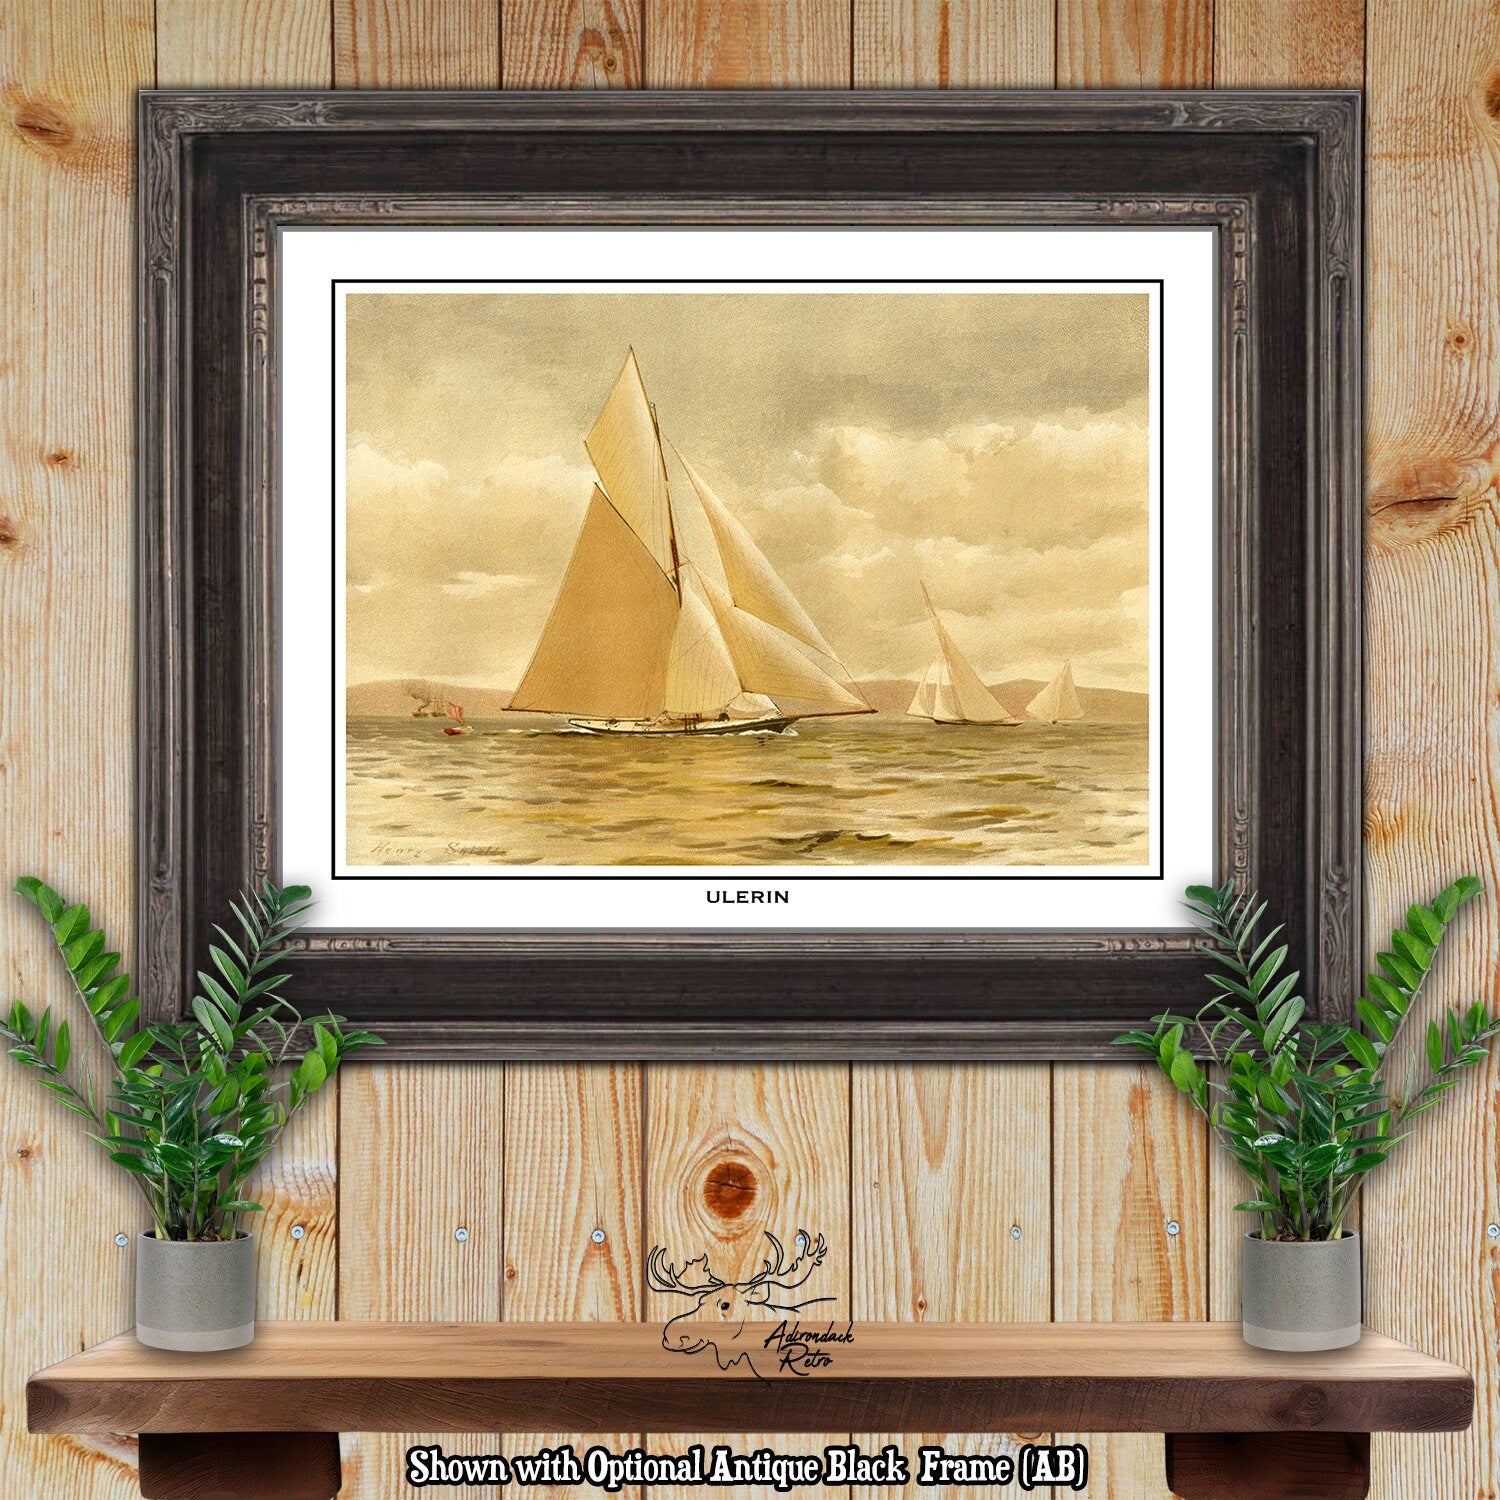 Clyde Yacht Ulerin by Henry Shields Giclee Fine Art Print at Adirondack Retro